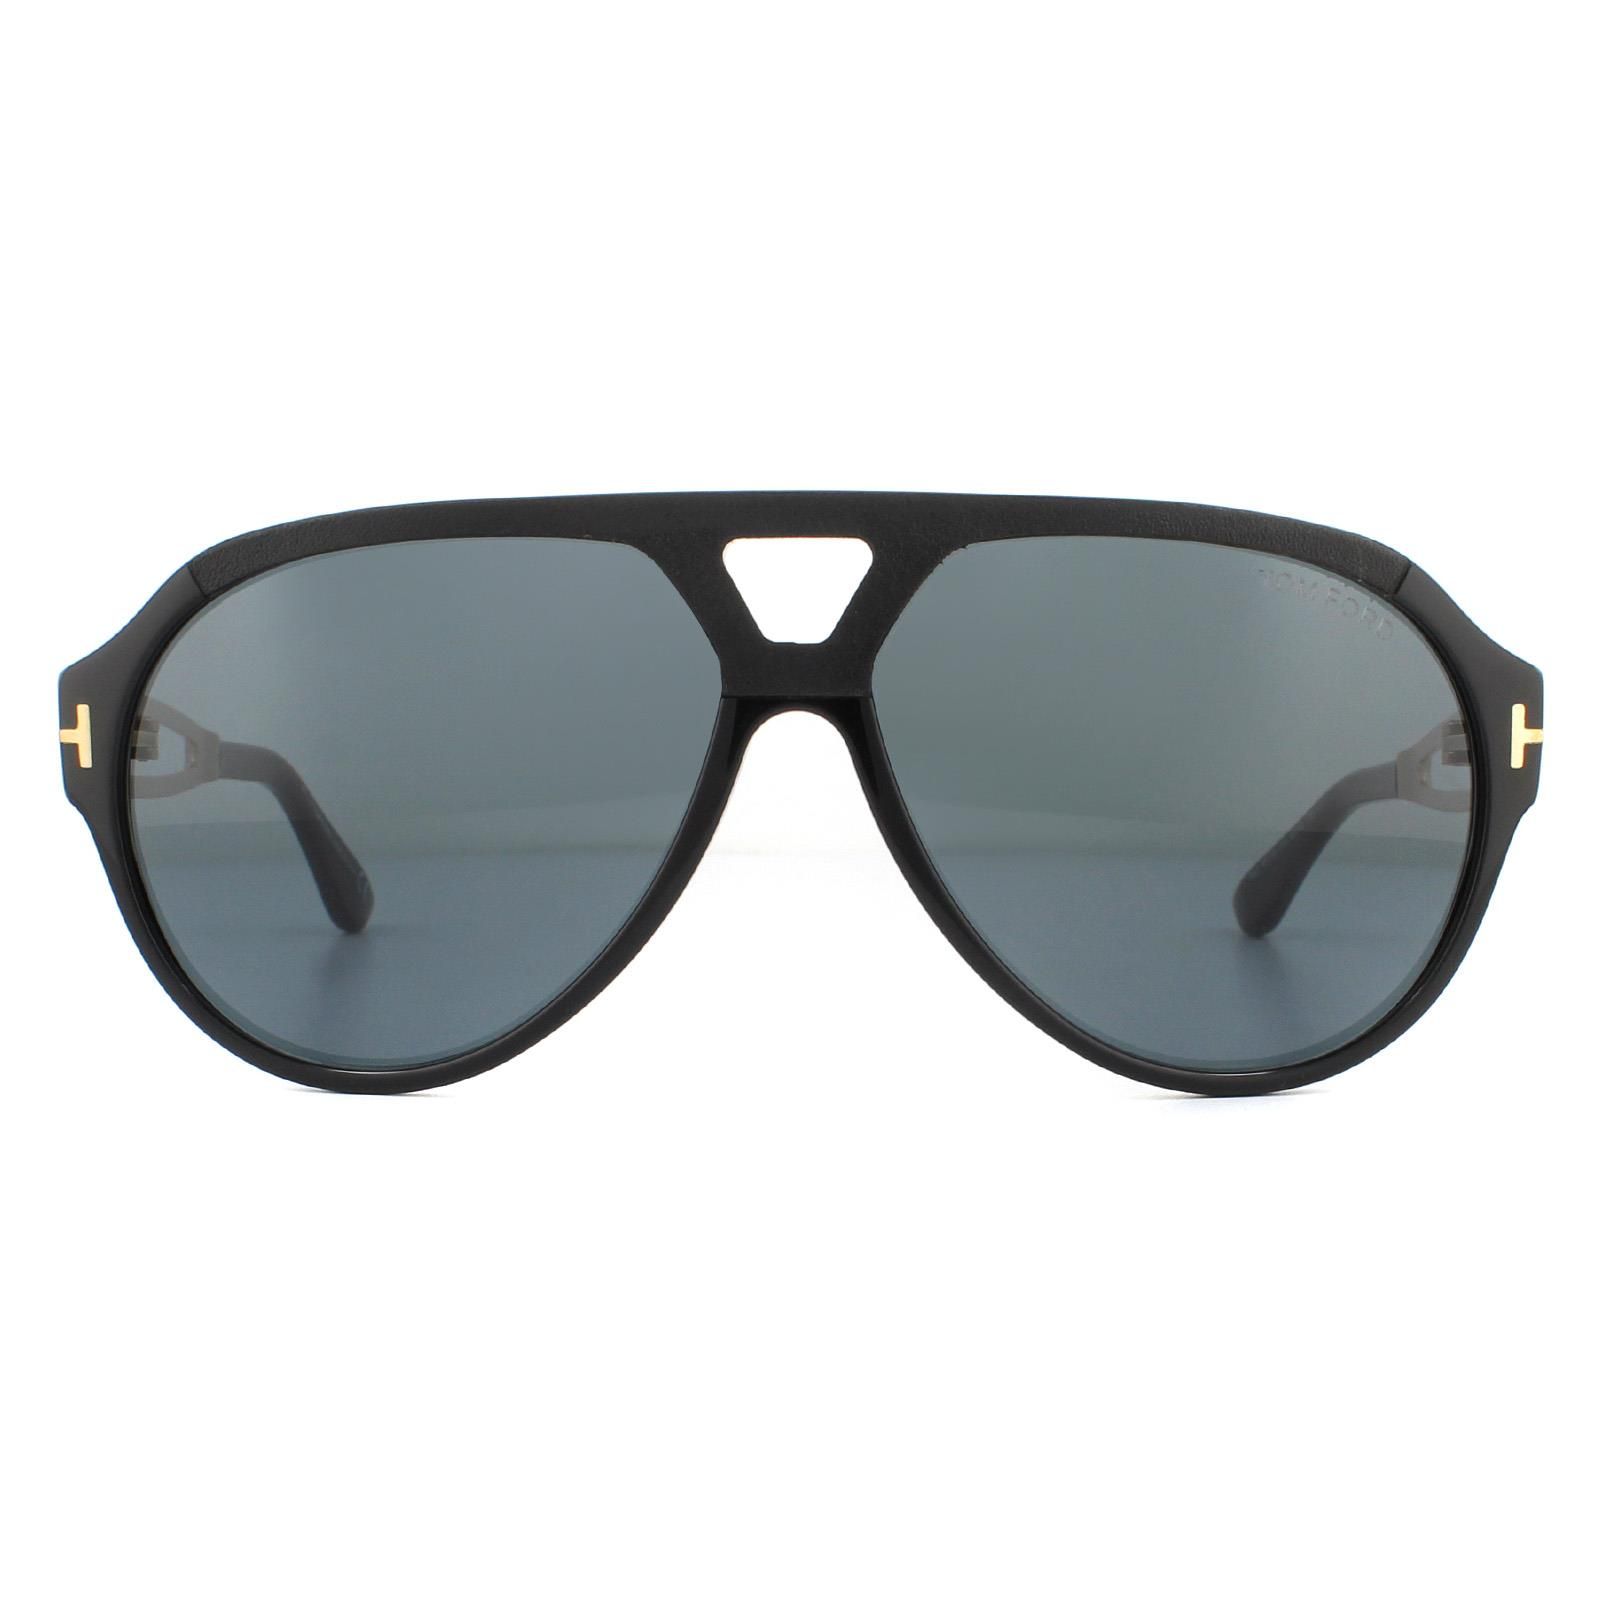 Tom Ford Sunglasses Paul FT0778 01A Shiny Black Smoke are a totally unique style with the cut-away detail from nthe temples, bold aviator shape and chunkcy thick retro style frame. Awesome Tom Ford sunglasses at his very best